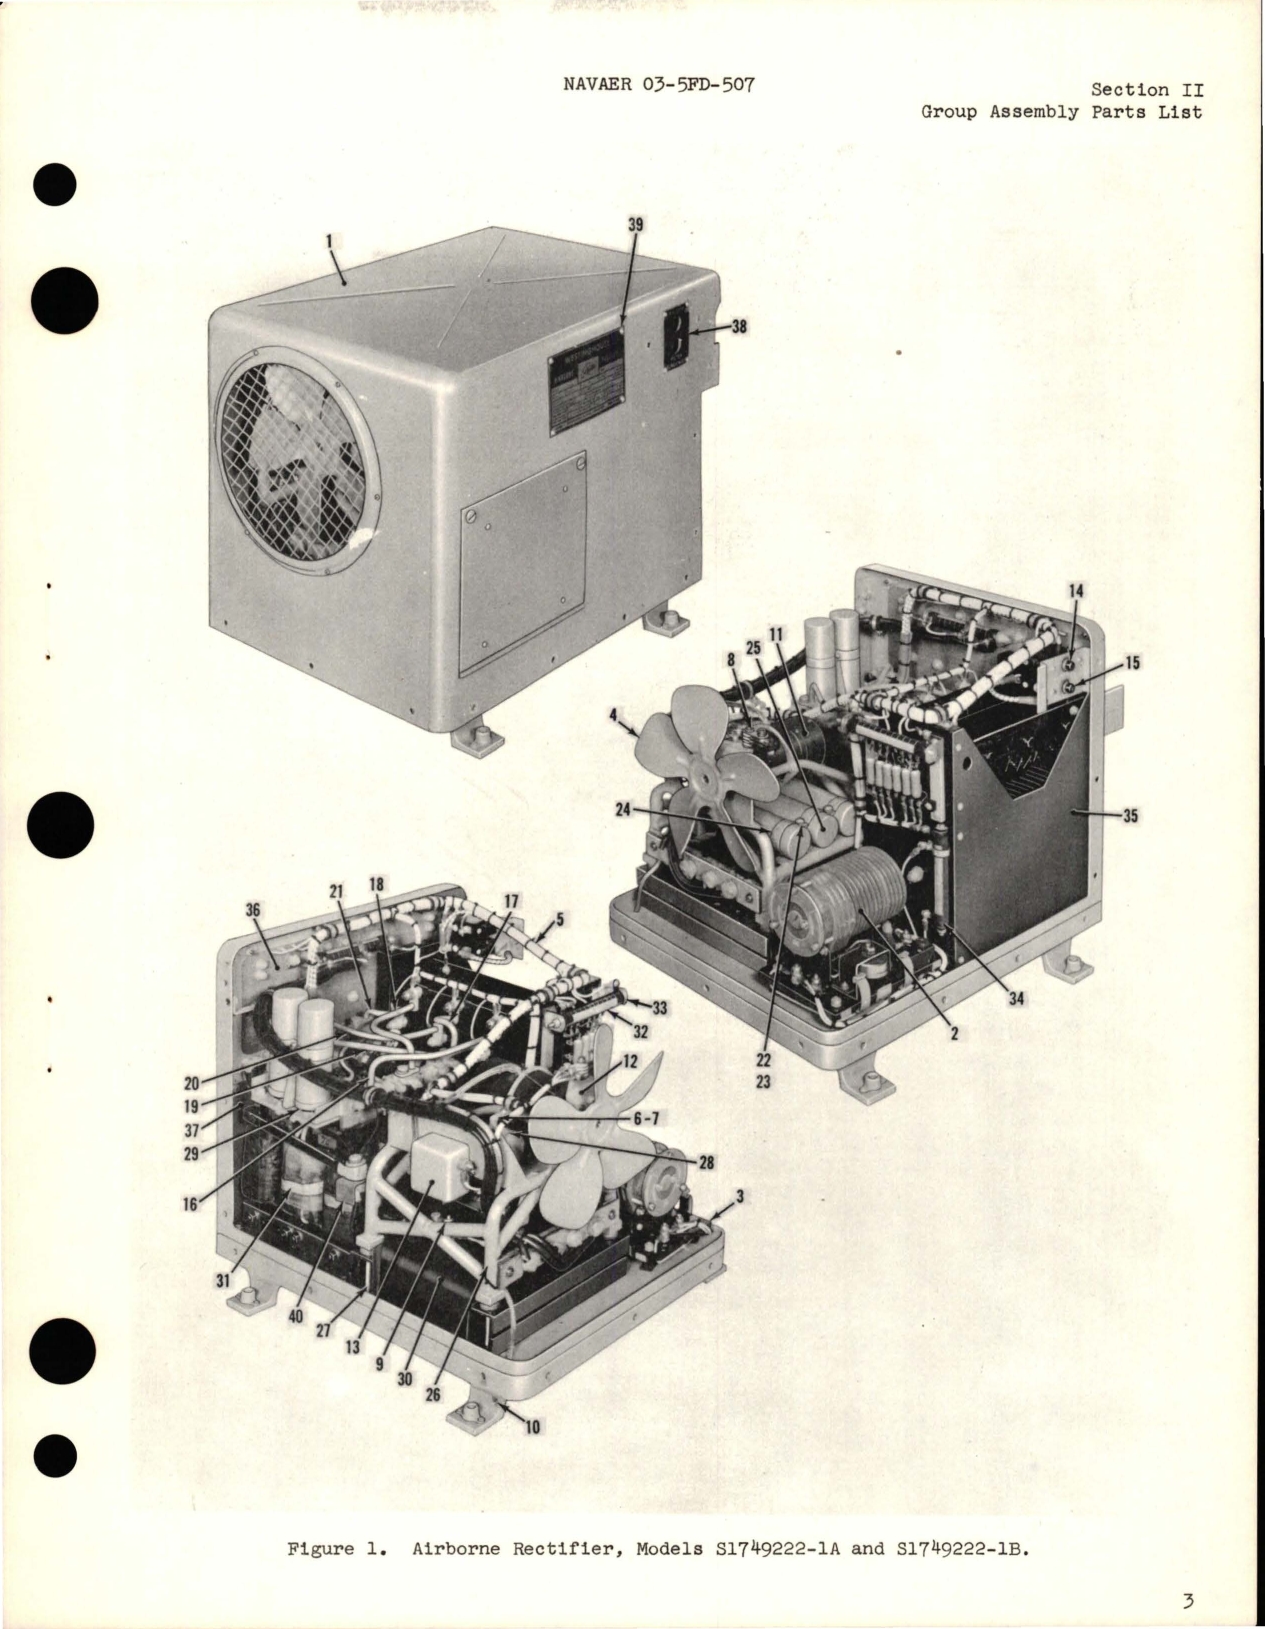 Sample page 7 from AirCorps Library document: Illustrated Parts Breakdown for Airborne Rectifier - Models S 1749222-1A, S 1749222-1B, S 1600919-A2, and S 1600919-B2 